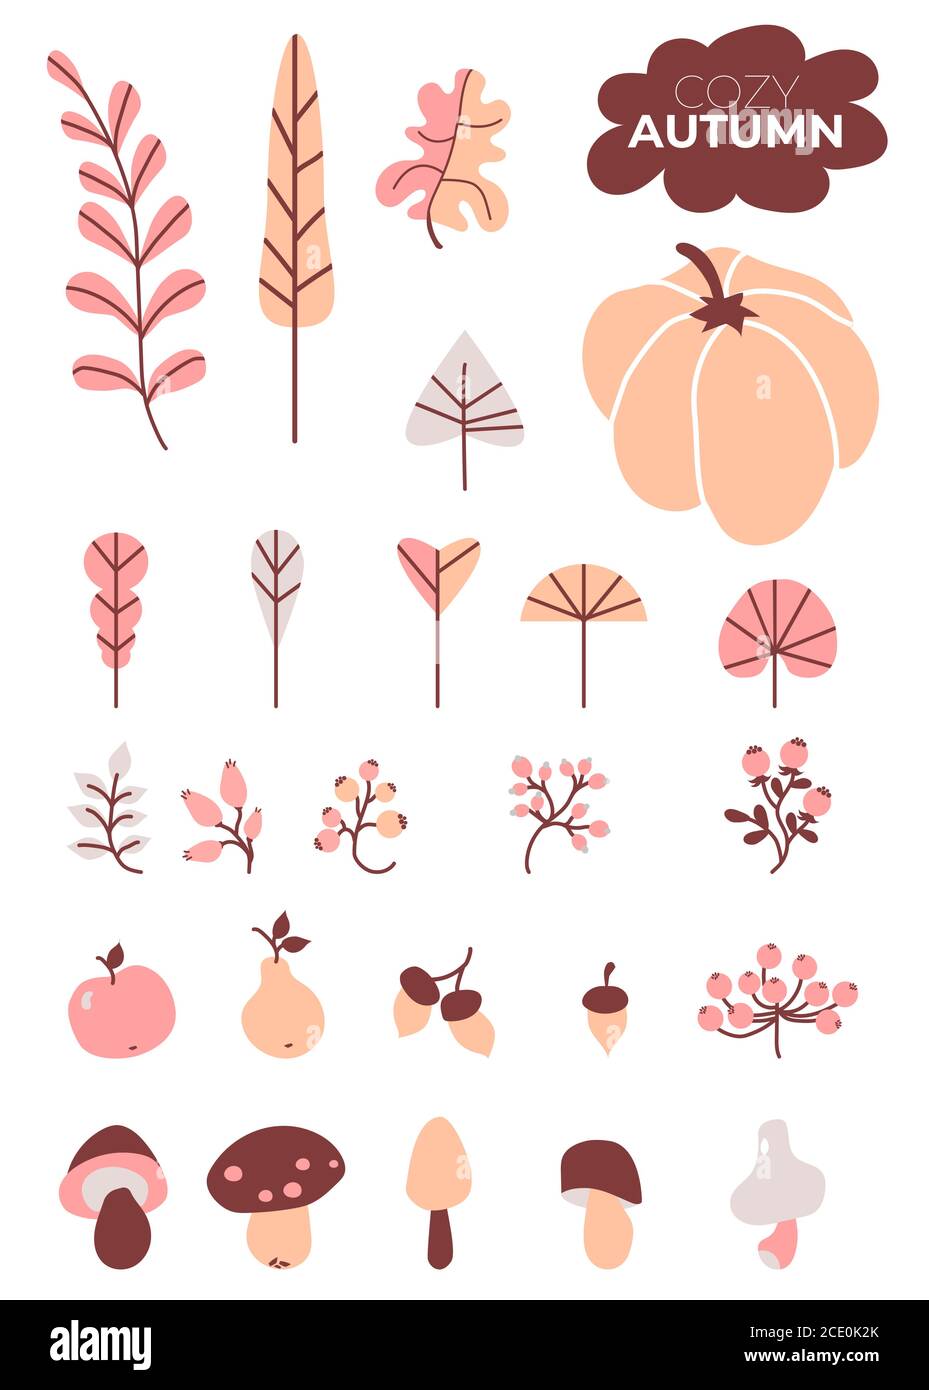 Colored set of autumn drawings. Cozy autumn. Various leaves and branches, berries and acorns, mushrooms and pumpkin, an apple and a pear. Use for fall Stock Vector